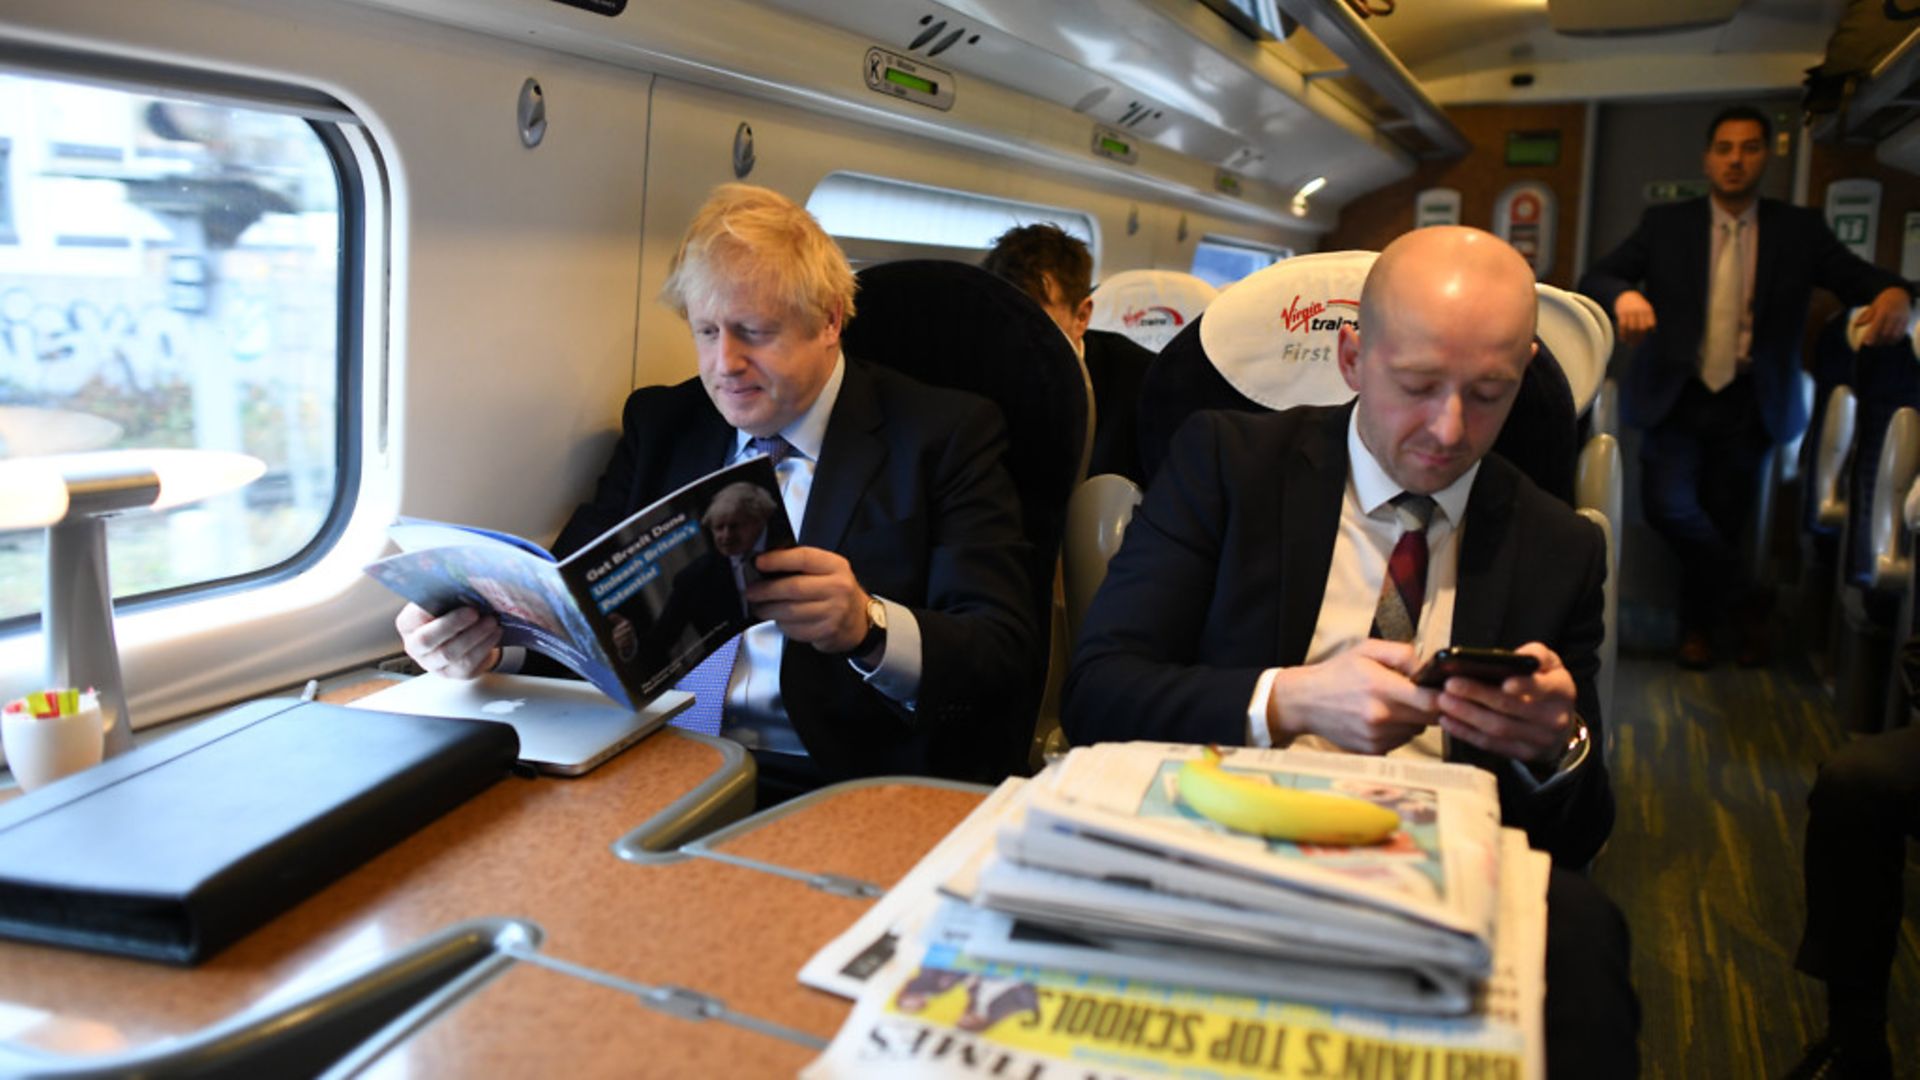 Boris Johnson, sitting with his former Director of Communications, Lee Cain (right), with a stack of newspapers on the train. - Credit: PA Wire/PA Images